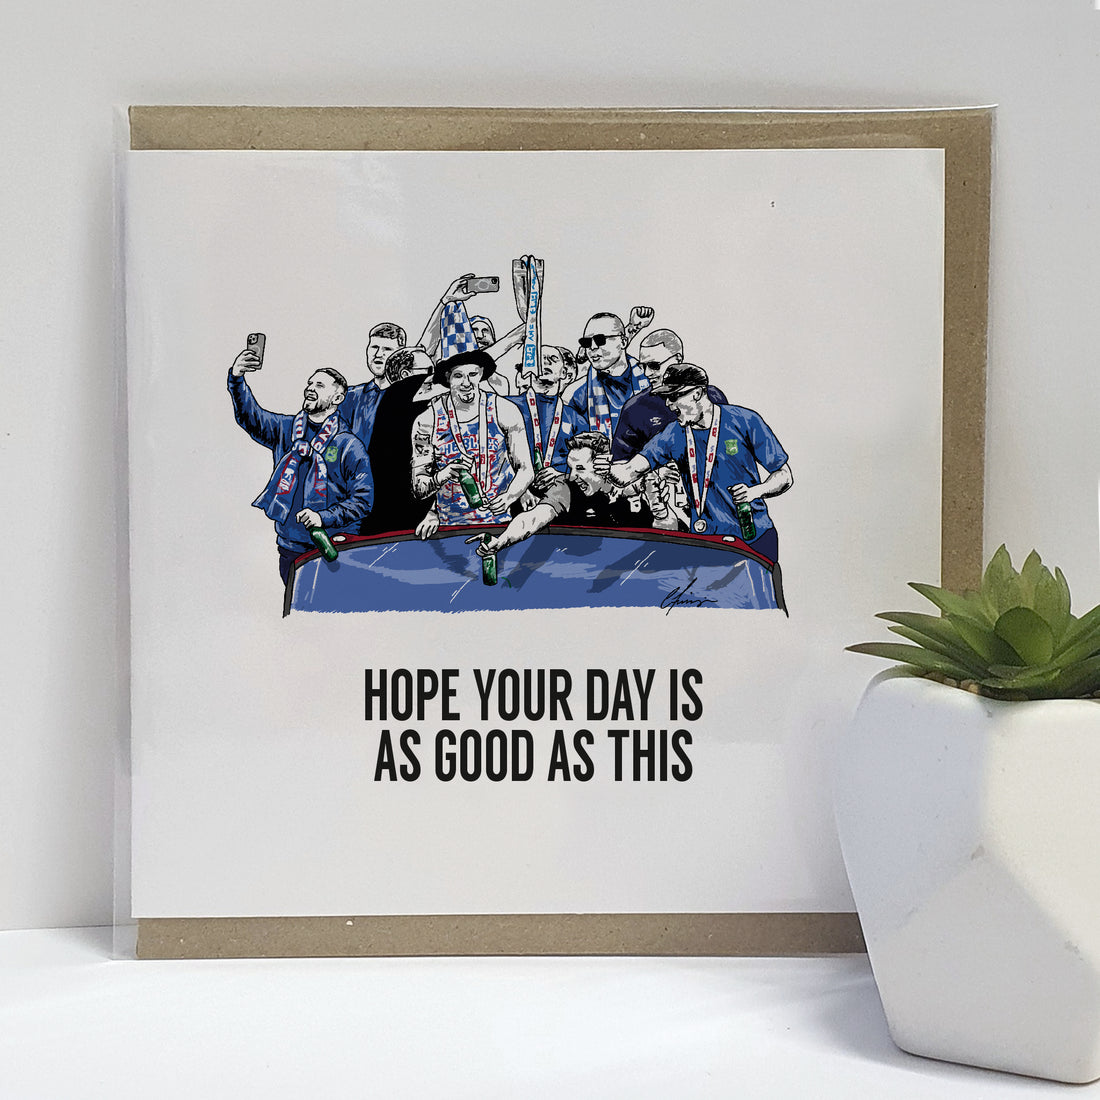 Greeting card featuring Ipswich Town Football Club celebrating their promotion to the Premier League, with the text 'Hope your day is as good as this' above an illustration of the team on a bus, joyously holding up a trophy. designed by local lingo